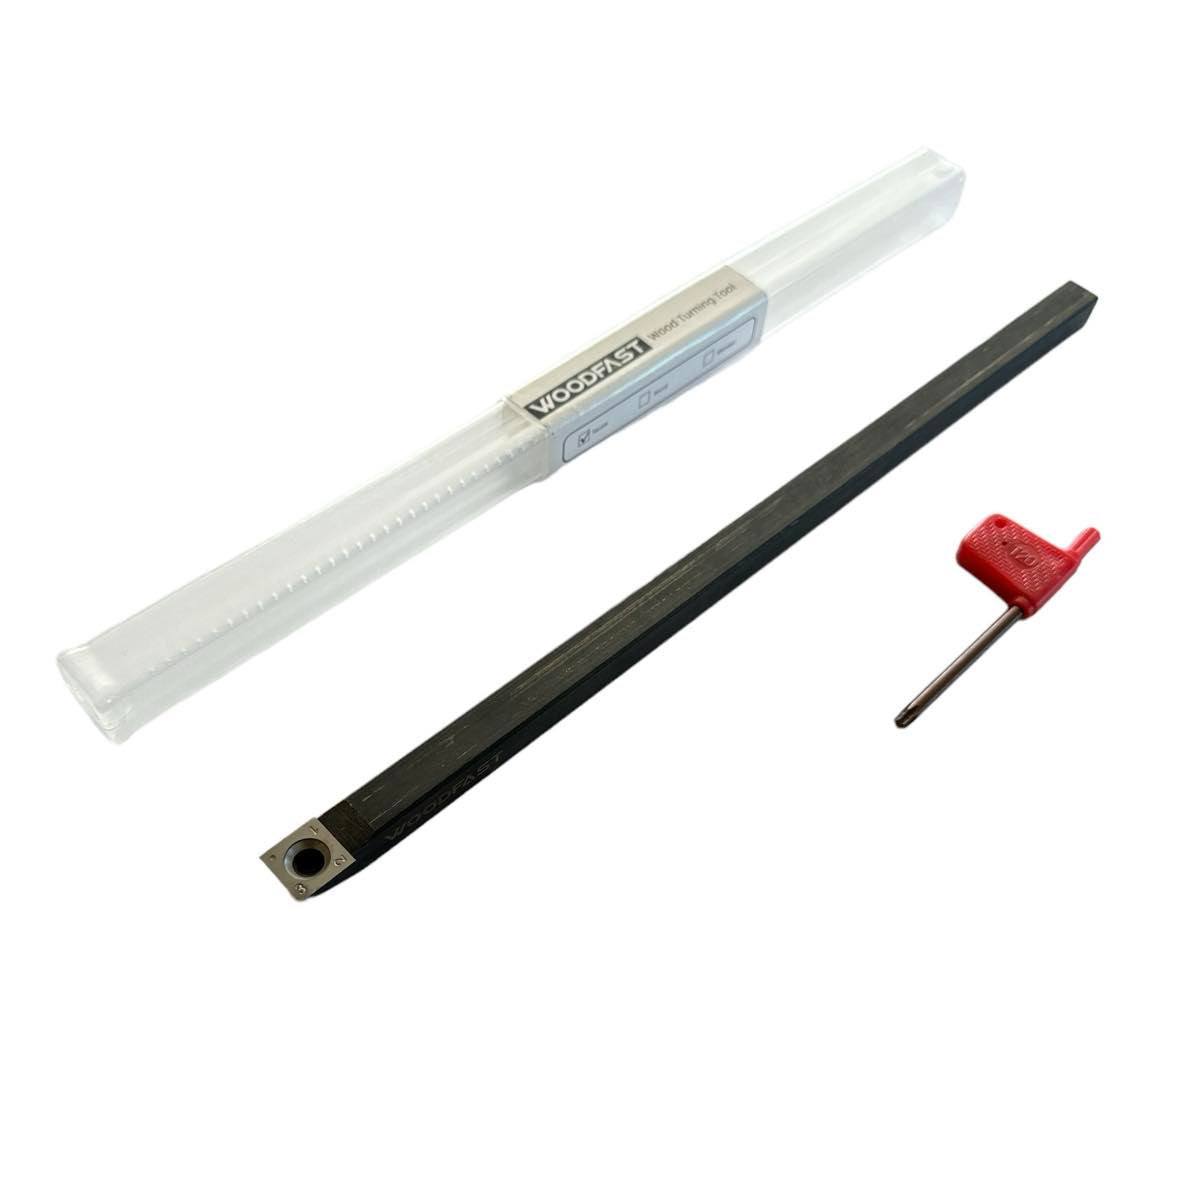 Replacement Shaft with Square Carbide Blade / Tip HB0008 suit WFT0011 Woodturning Set by Woodfast